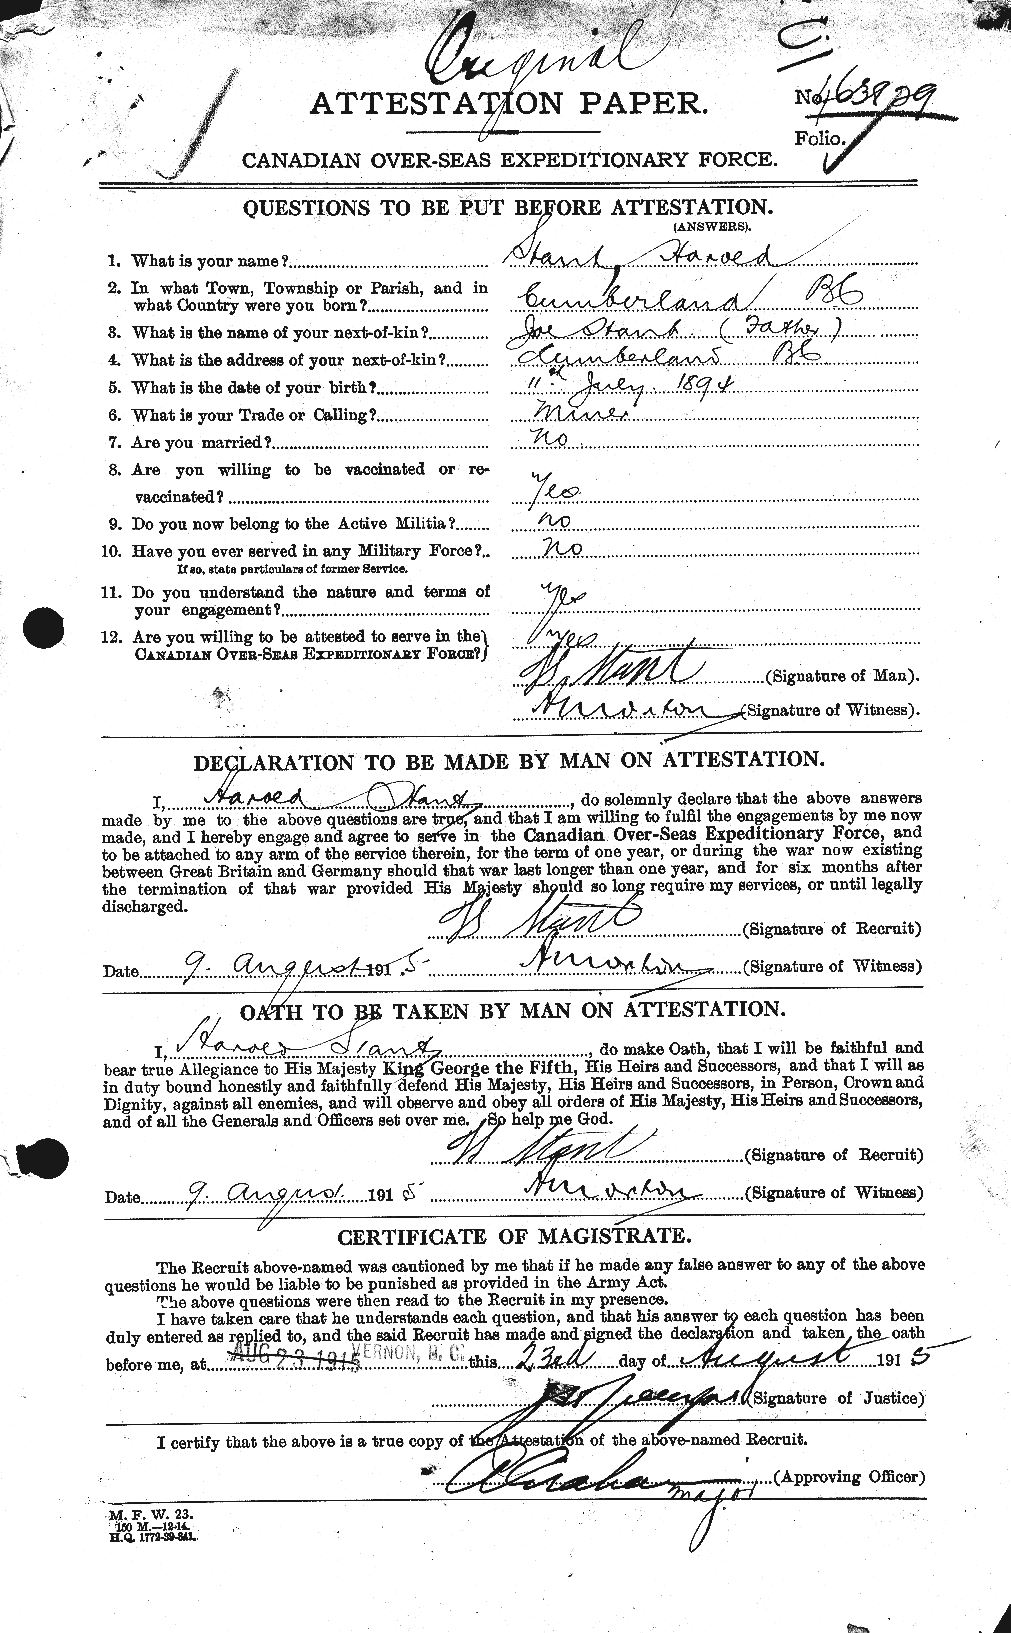 Personnel Records of the First World War - CEF 114563a